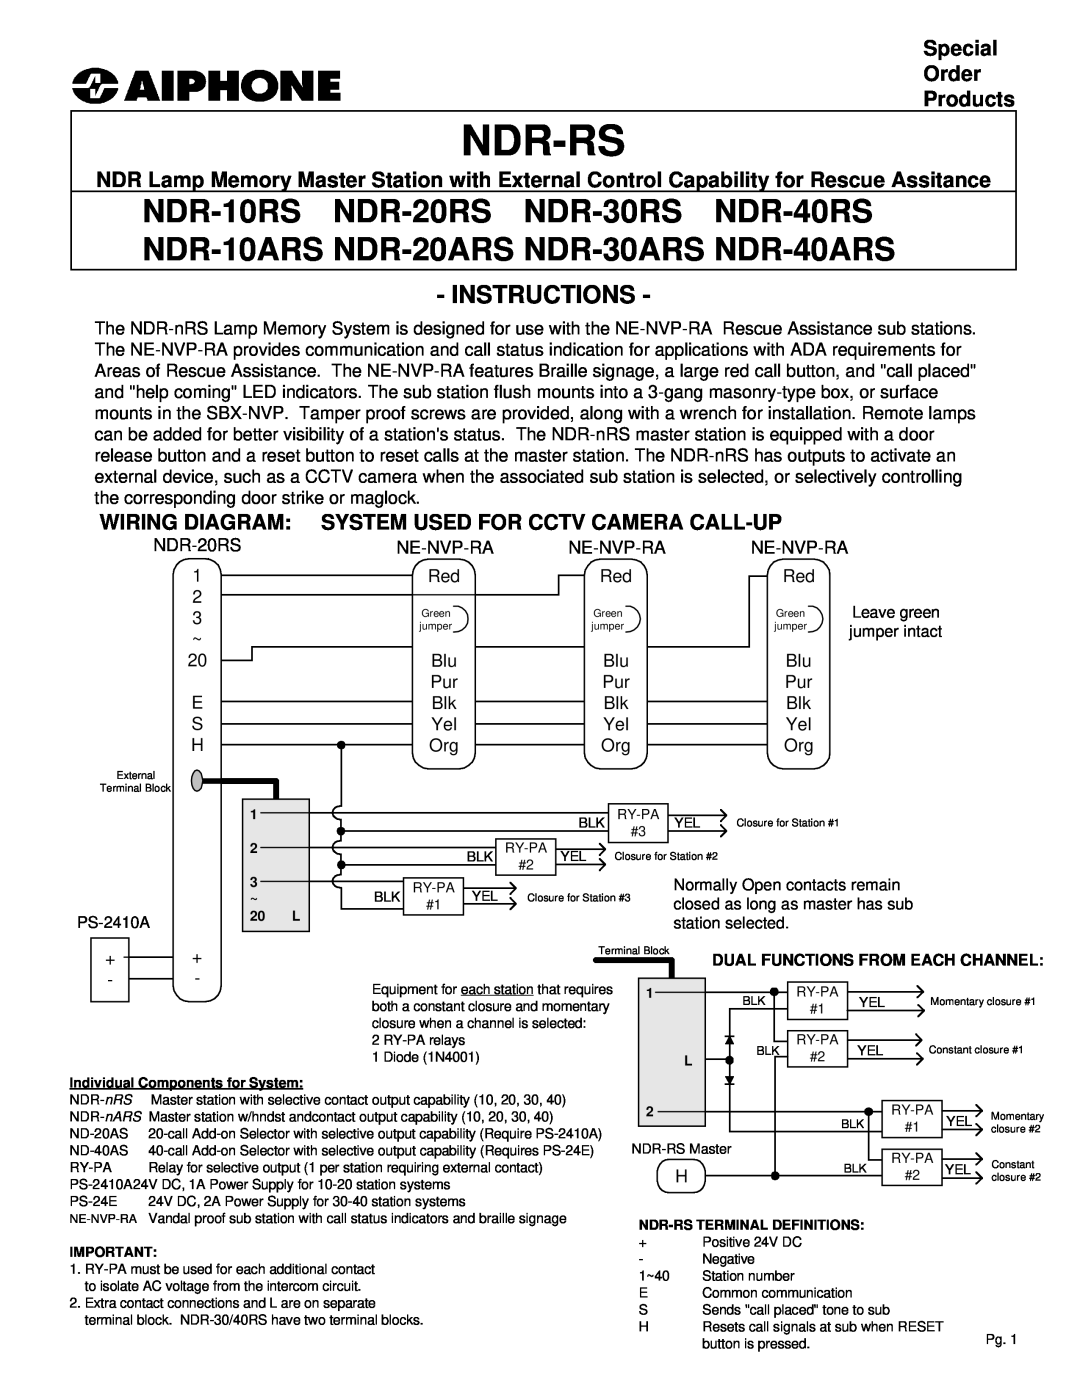 Aiphone NDR-20ARS manual Special Order Products, Wiring Diagram System Used For Cctv Camera Call-Up, Ndr-Rs, Instructions 